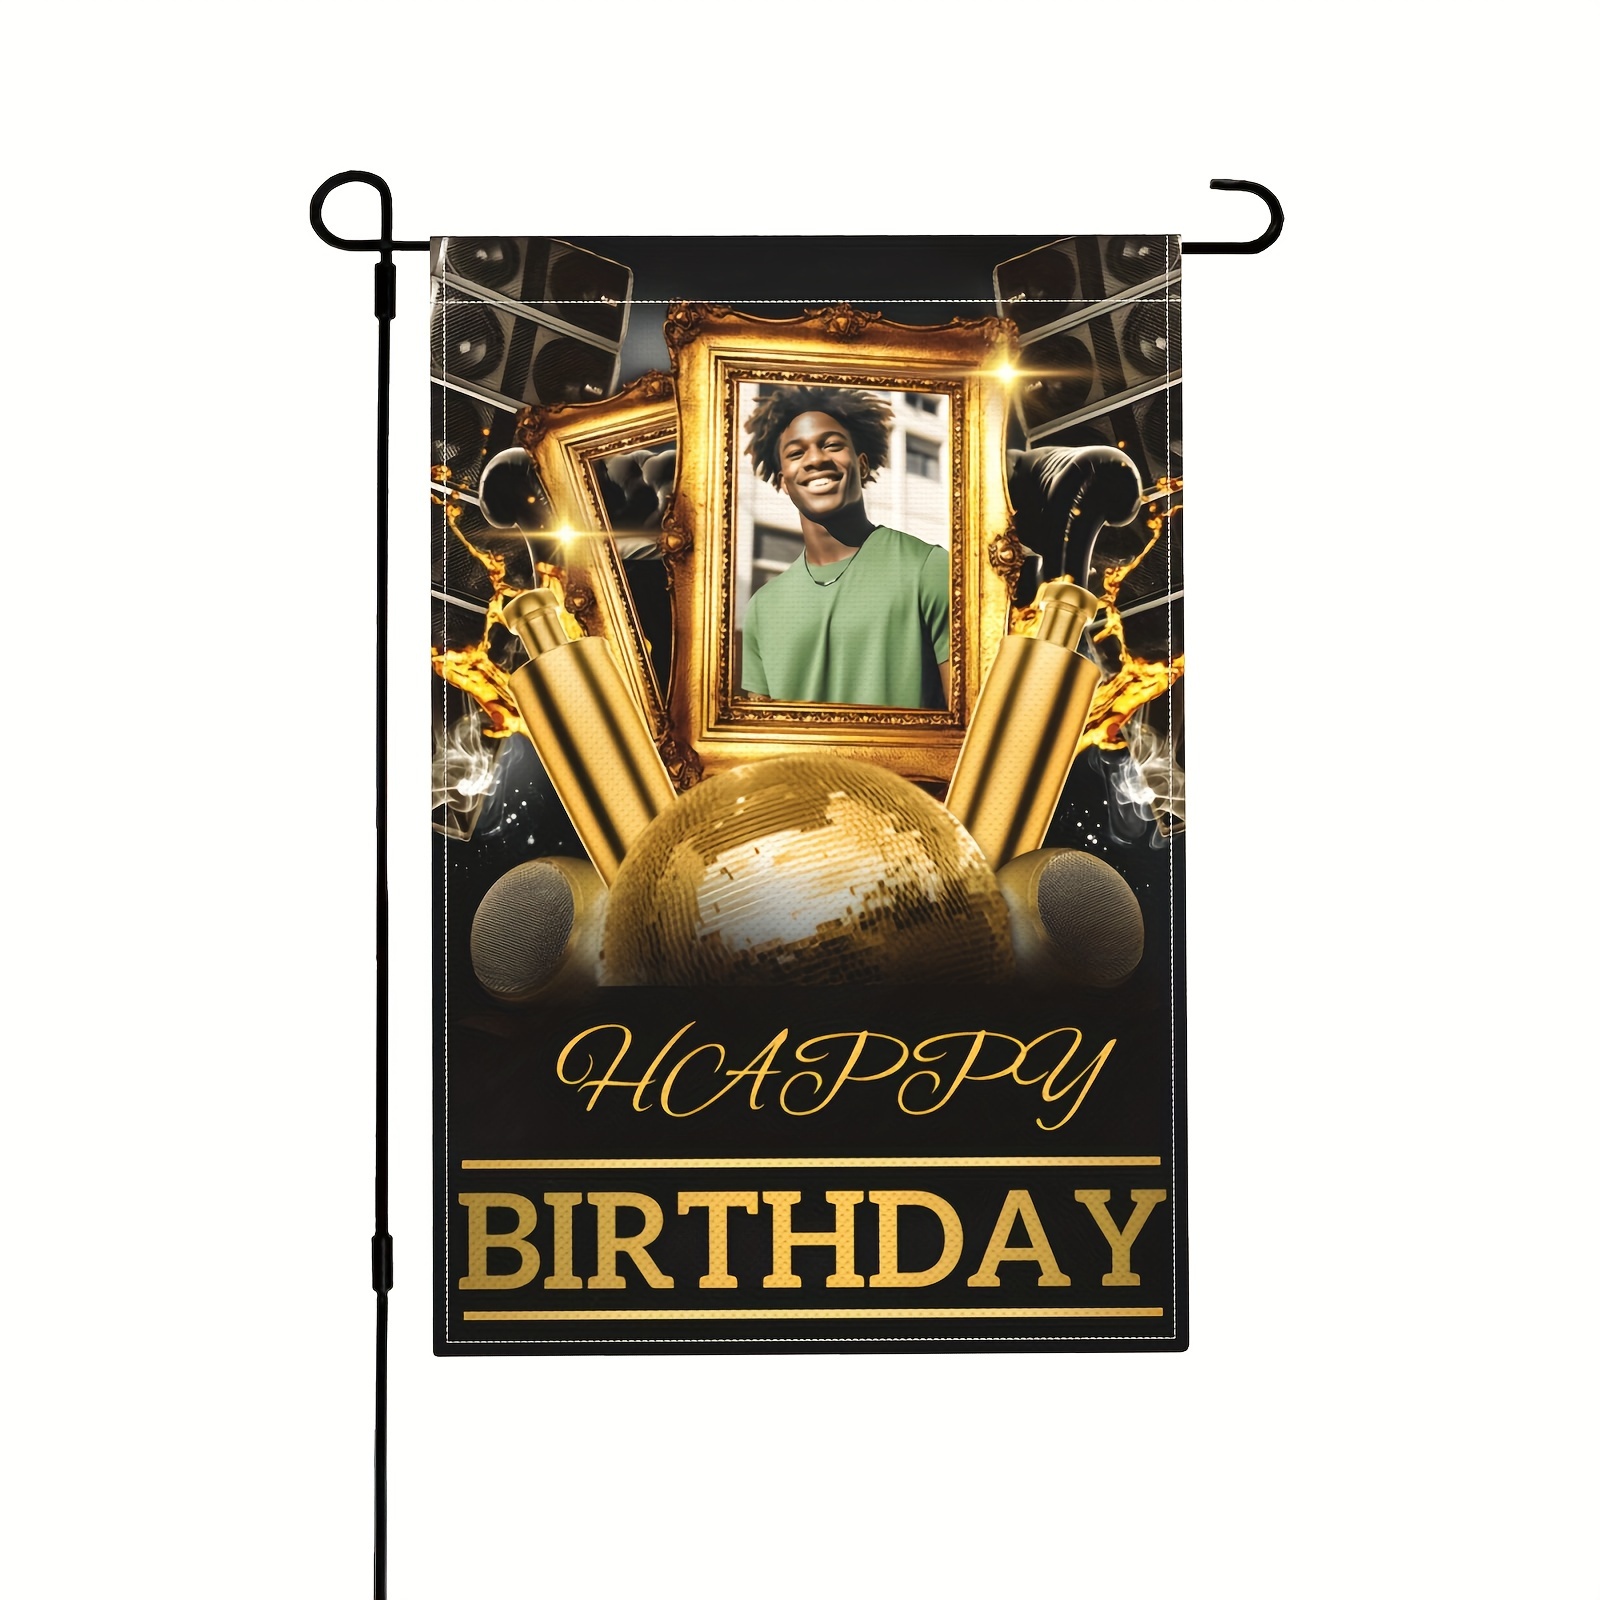 

Custom Happy Birthday Photo Garden Flag - Personalized Outdoor Decor, Perfect Gift For Him/her, No Metal Brace Needed, 12x18 Inches Happy Birthday Garden Flag Birthday Garden Flag